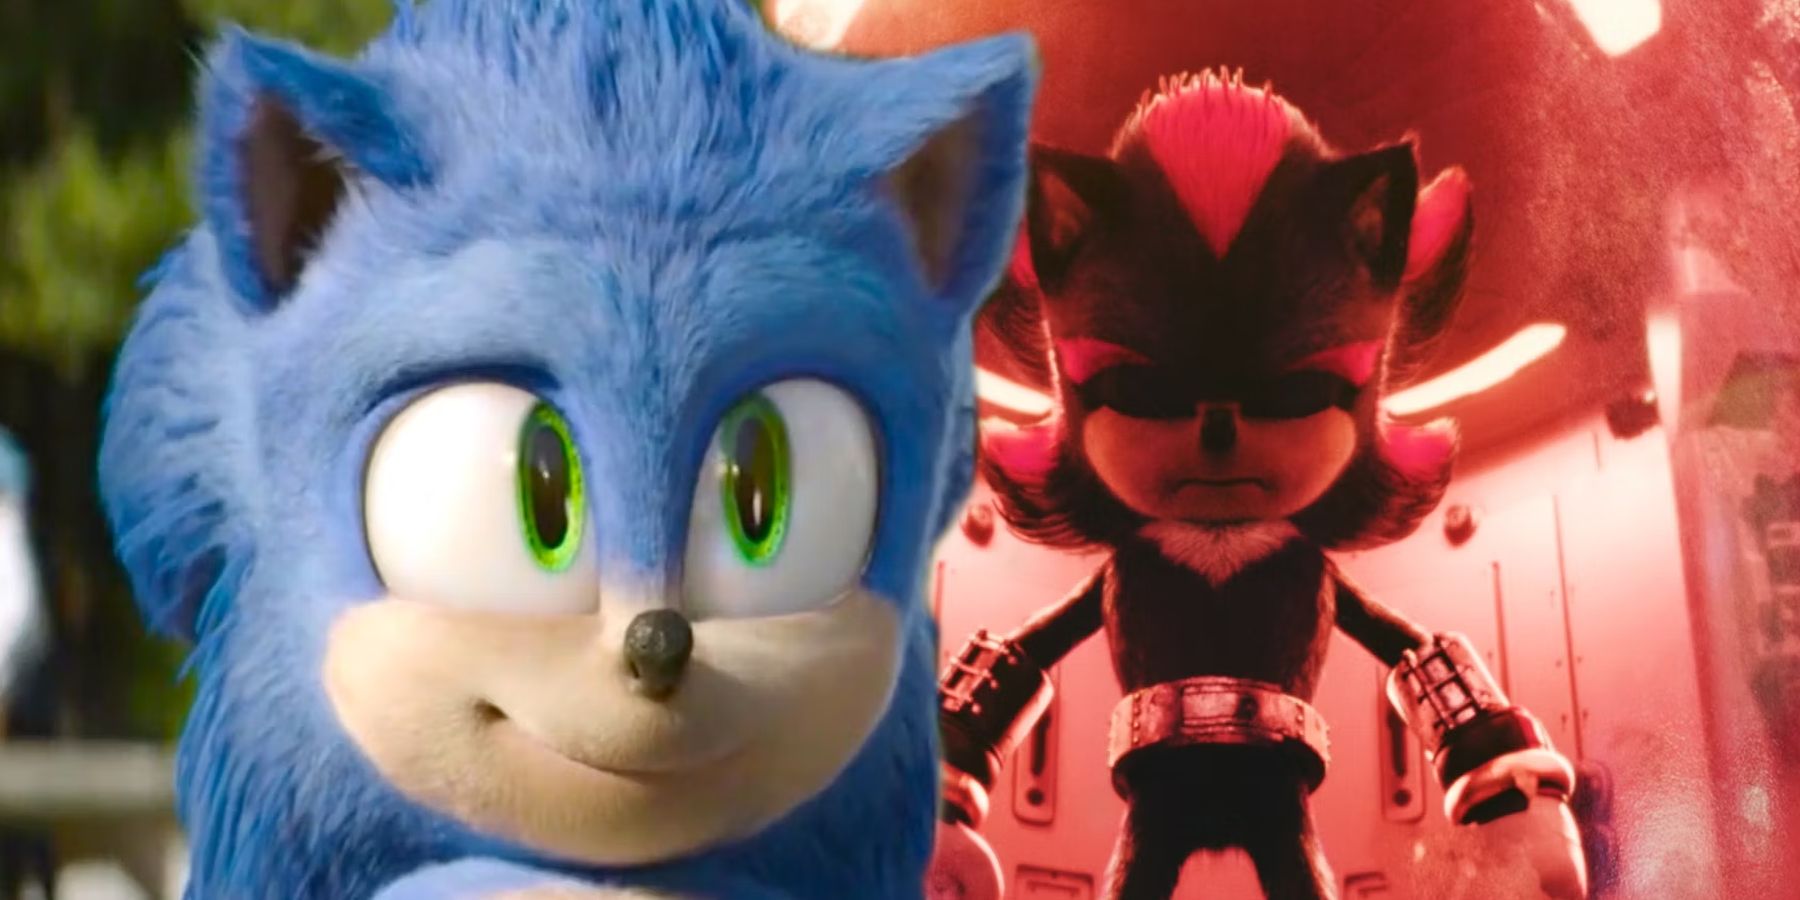 Sonic Smiling and Shadow in Containment in Sonic the Hedgehog 2